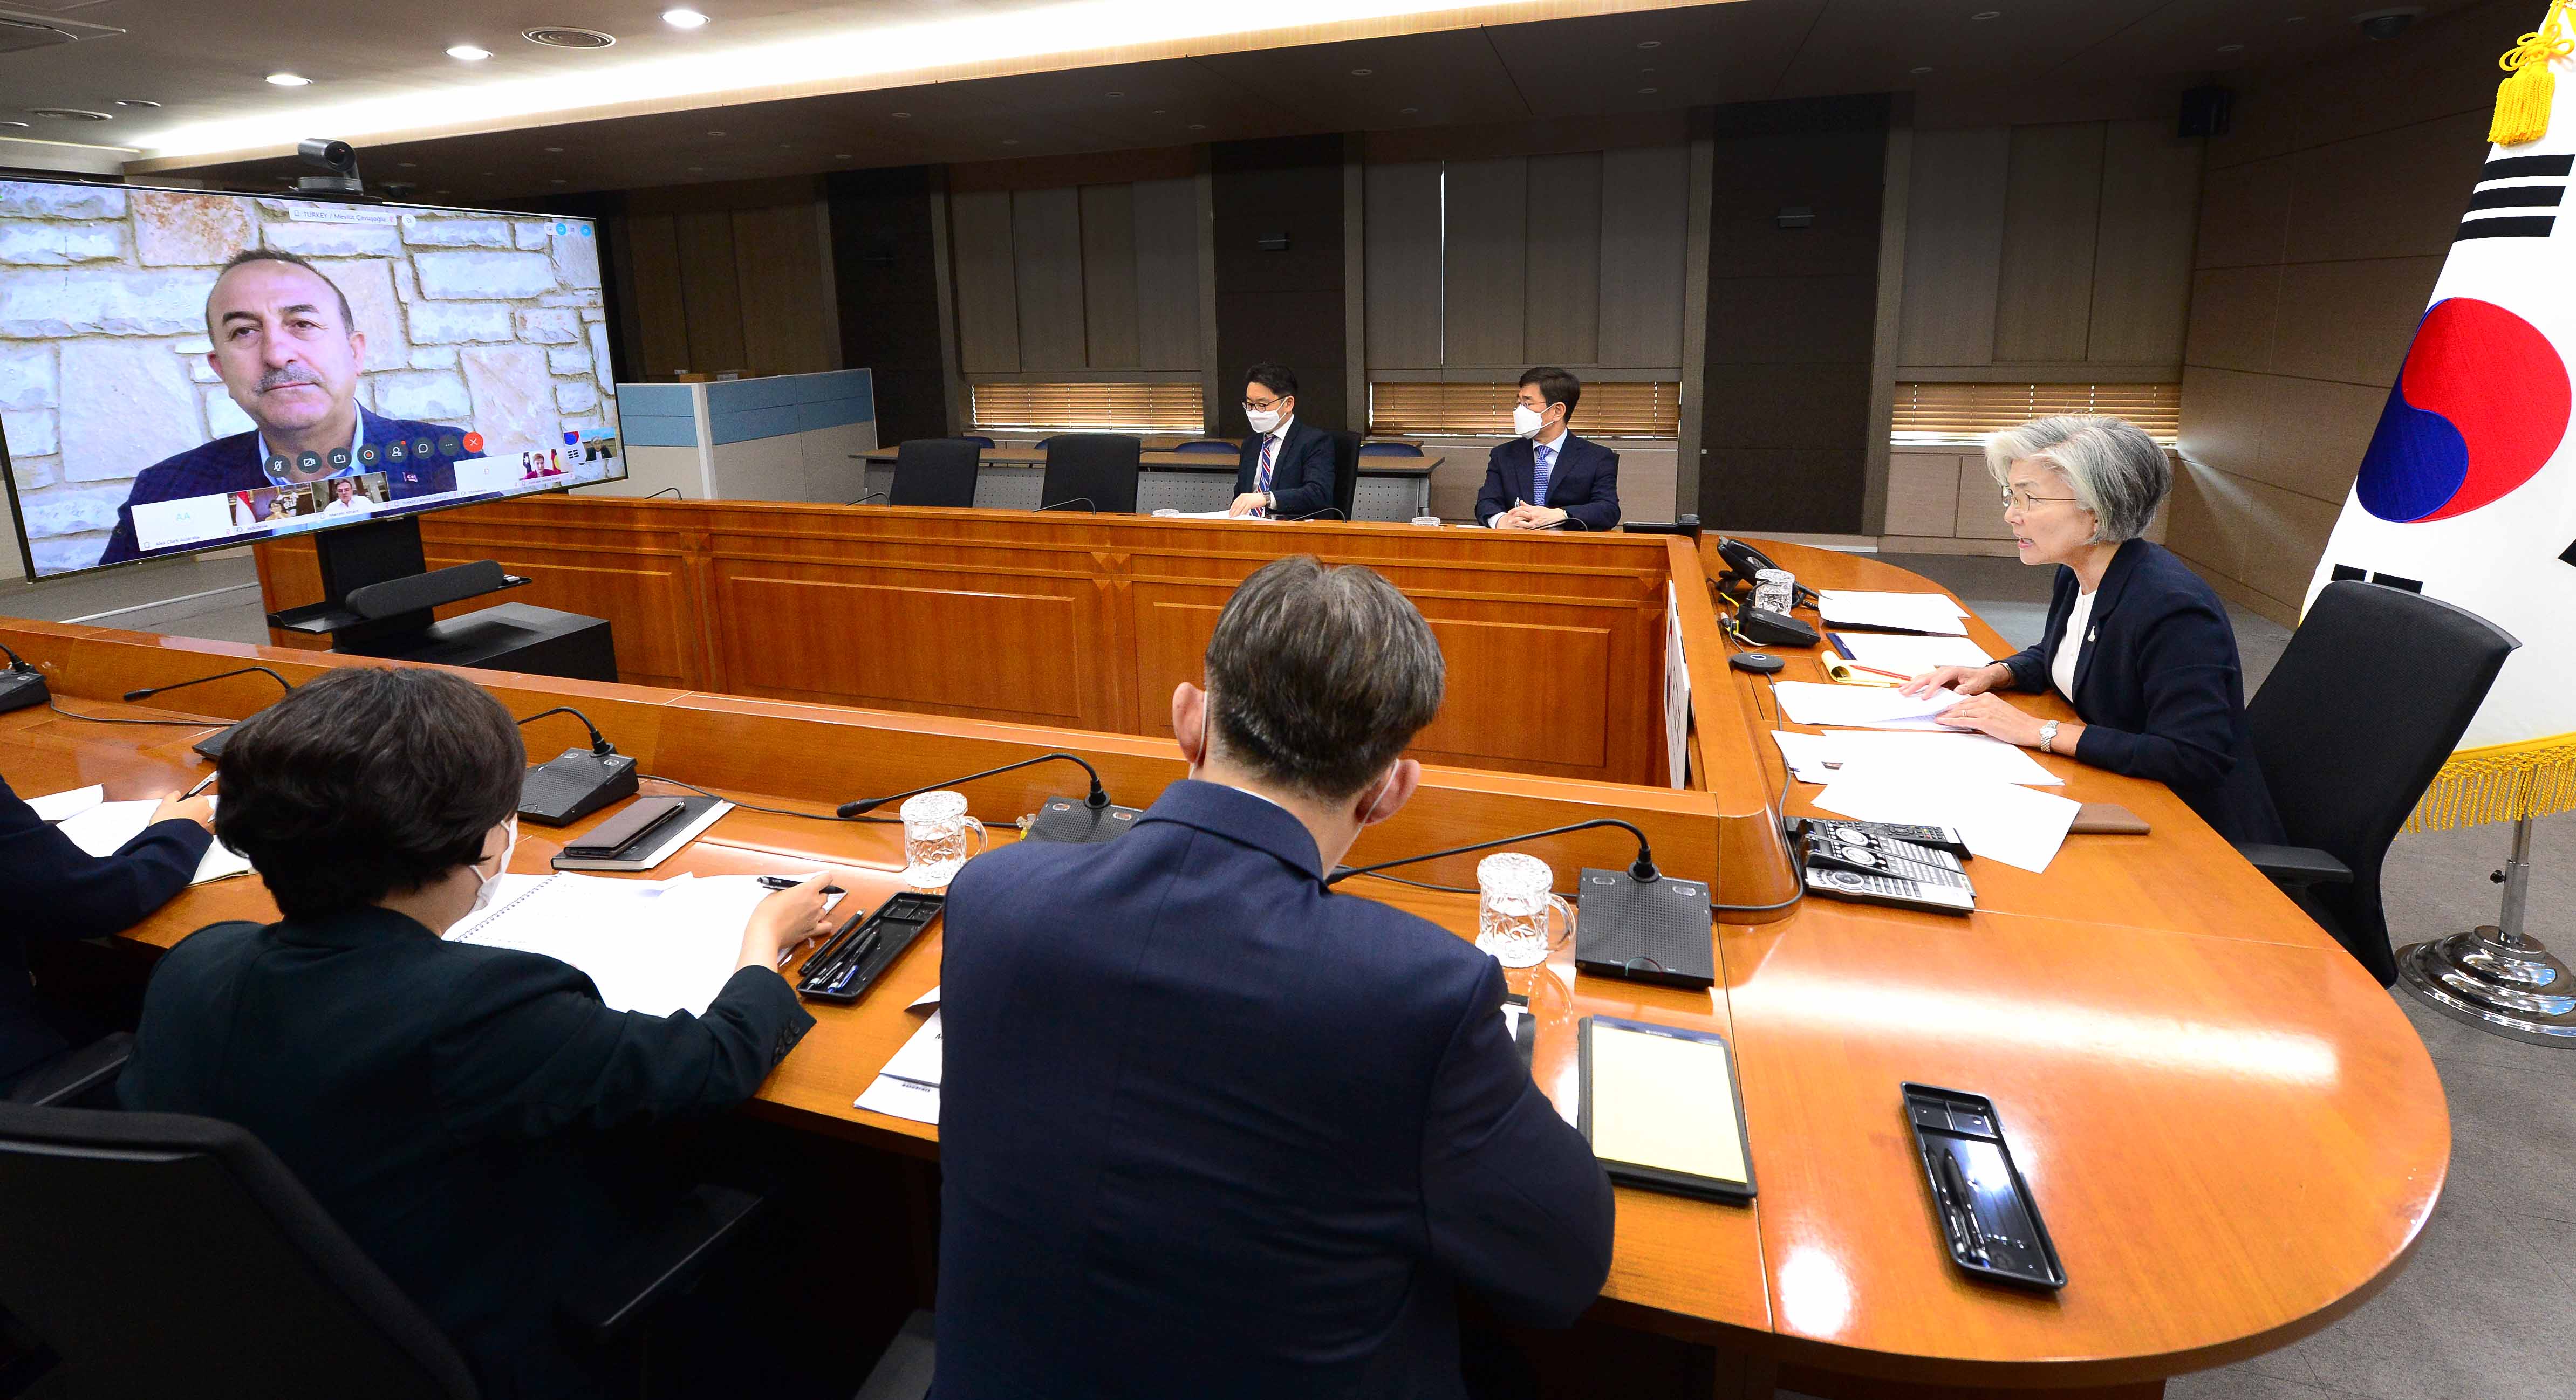 [Jul 19] Korea hosts the 17th MIKTA Foreign Ministers Meeting